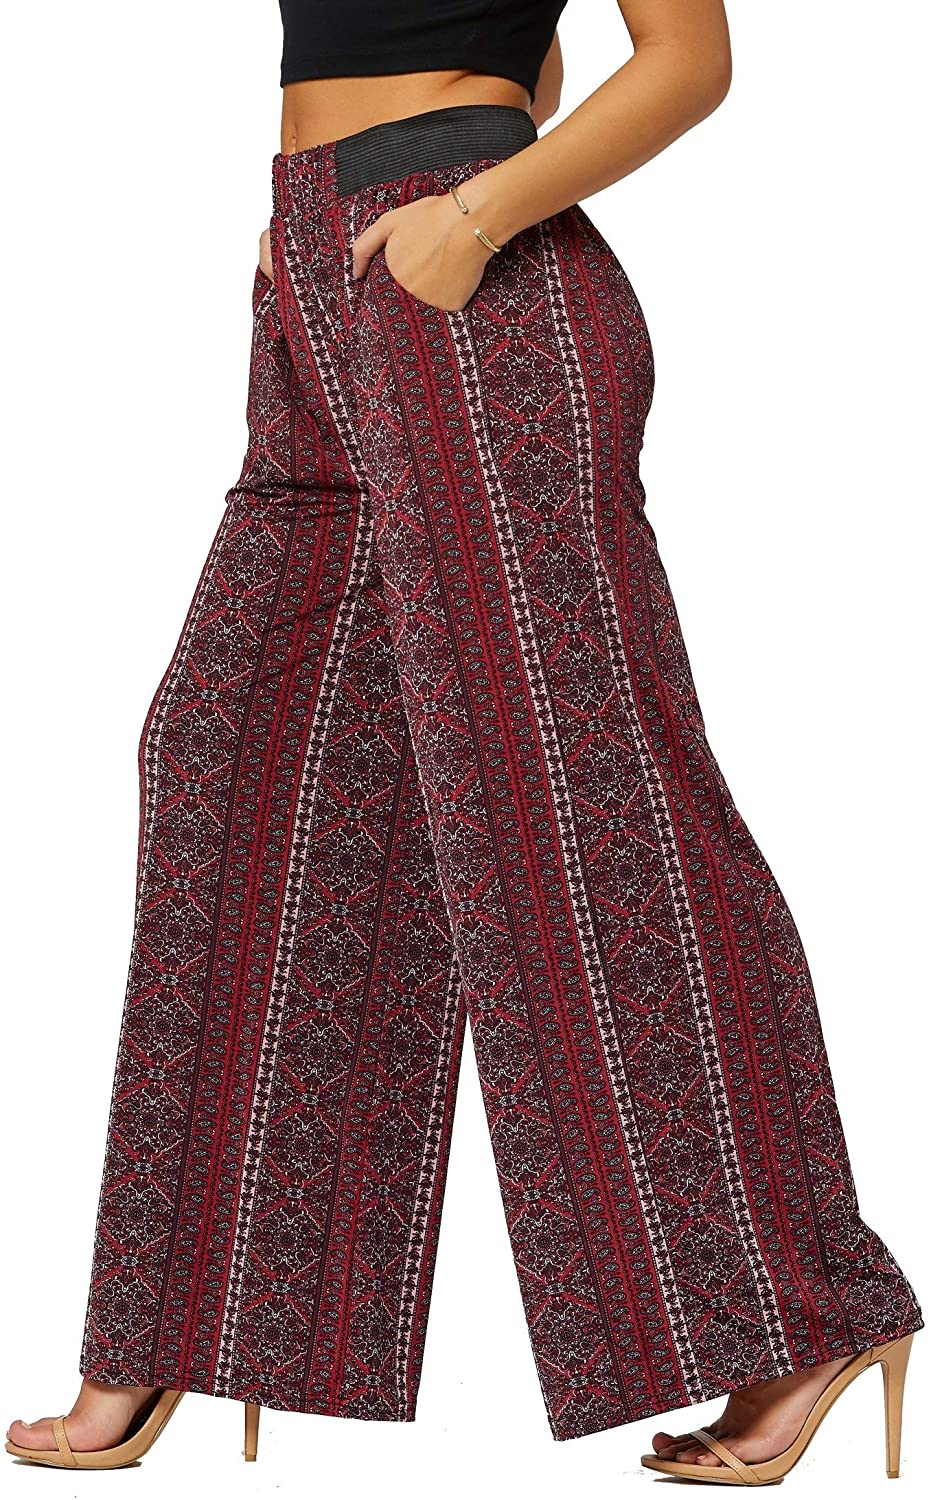 High Waist Solid and Printed Designs Premium Women’s Palazzo Pants with Pockets 